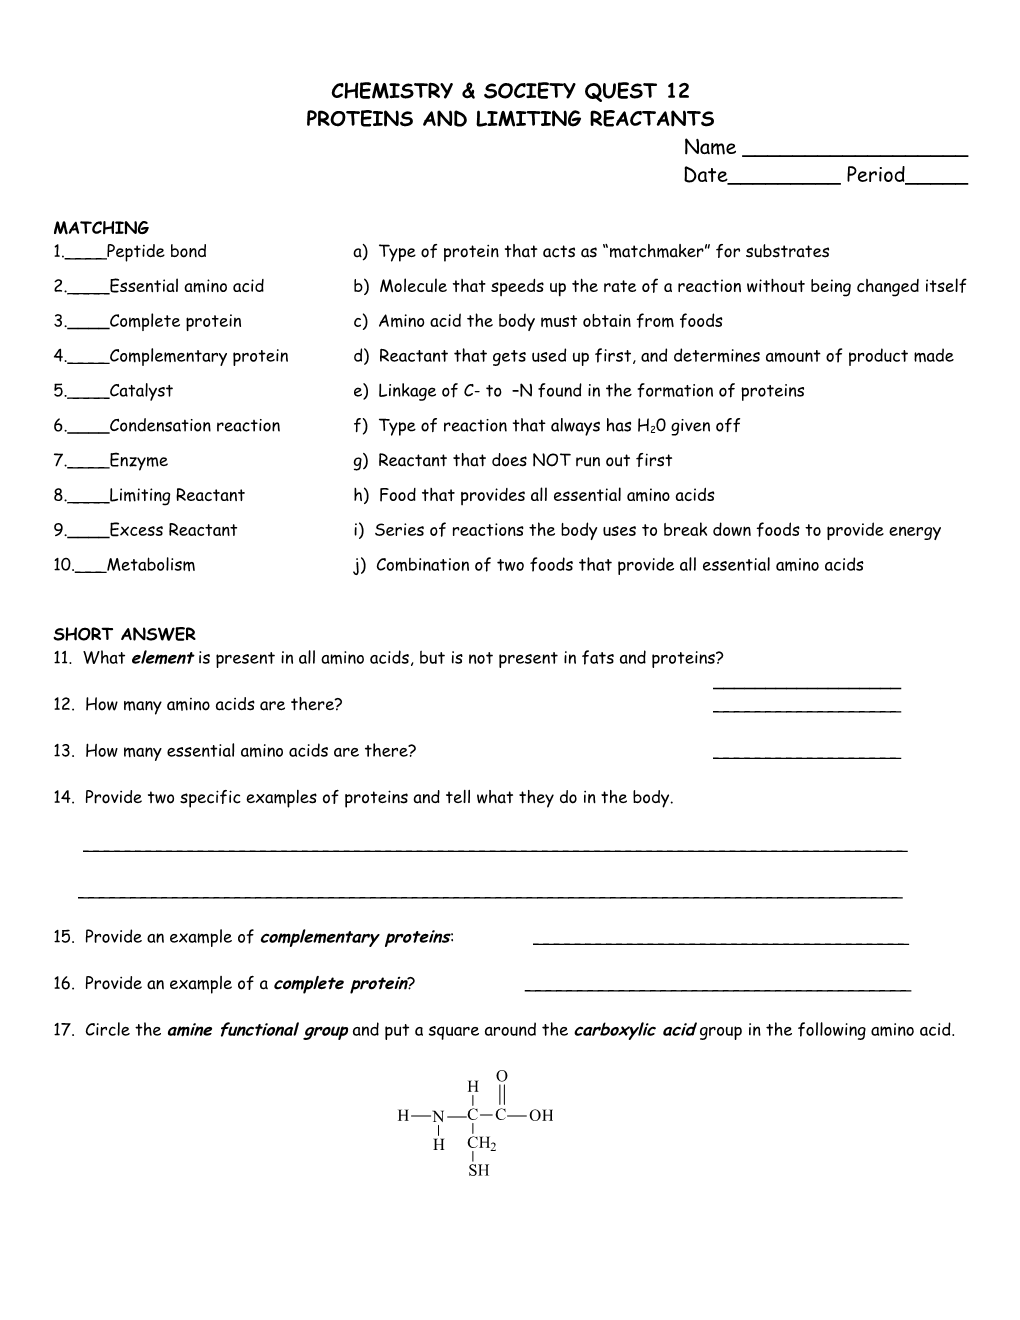 Chemistry & Society Quest 12